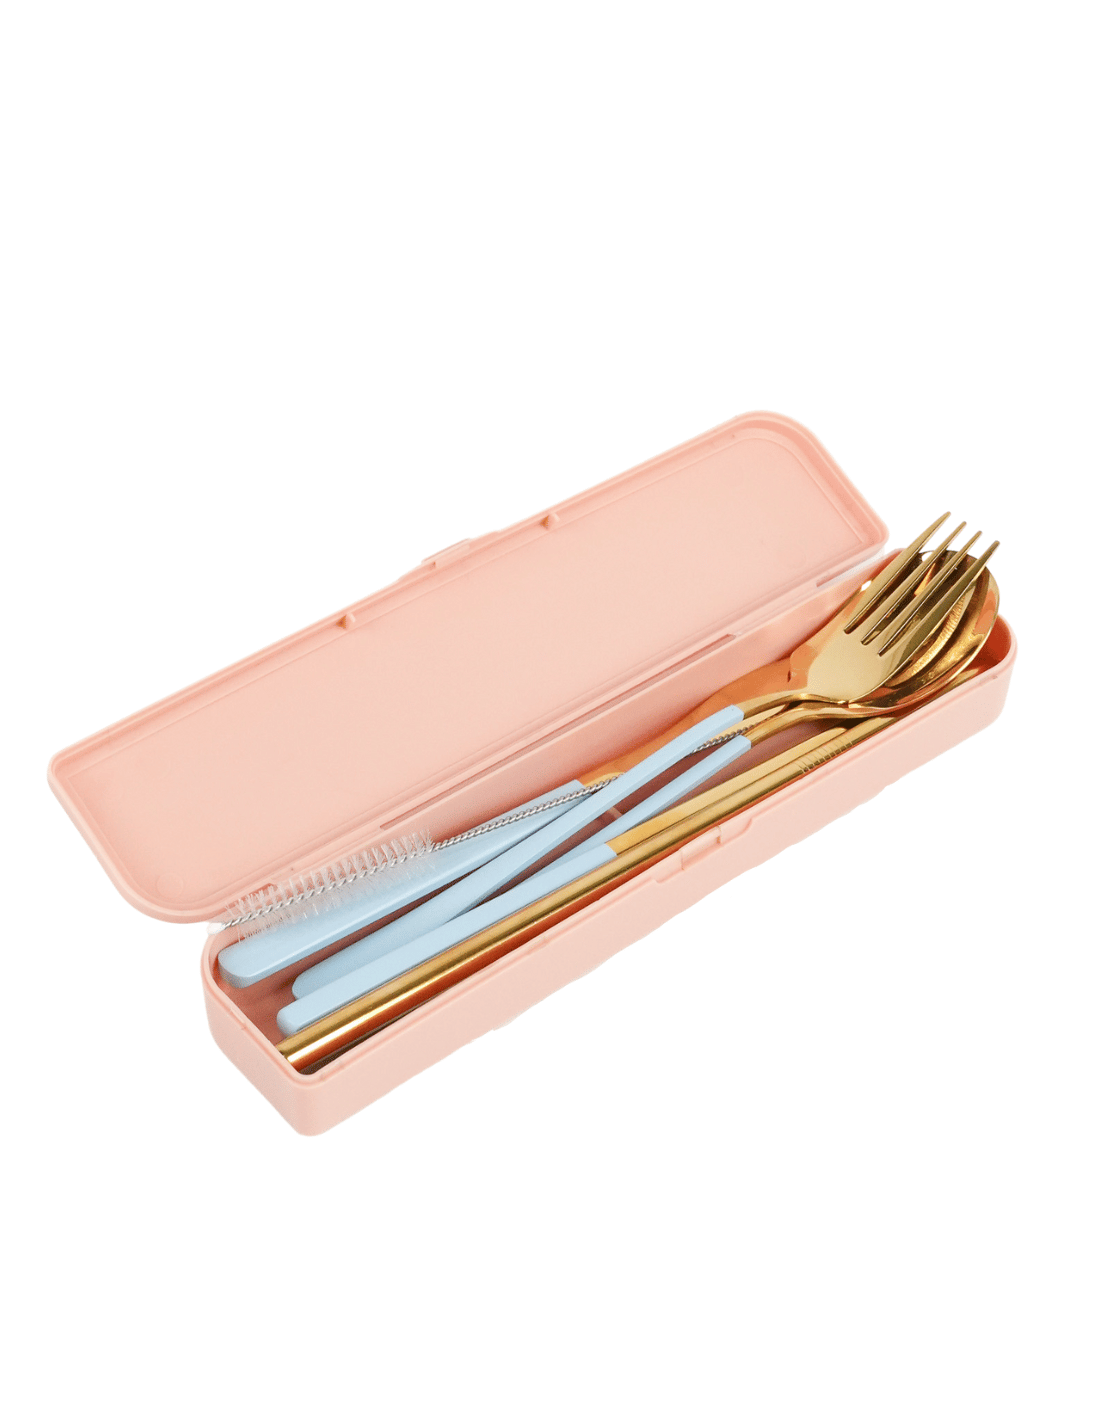 Take Me Away Cutlery Kit - Gold with Powder Blue Handle